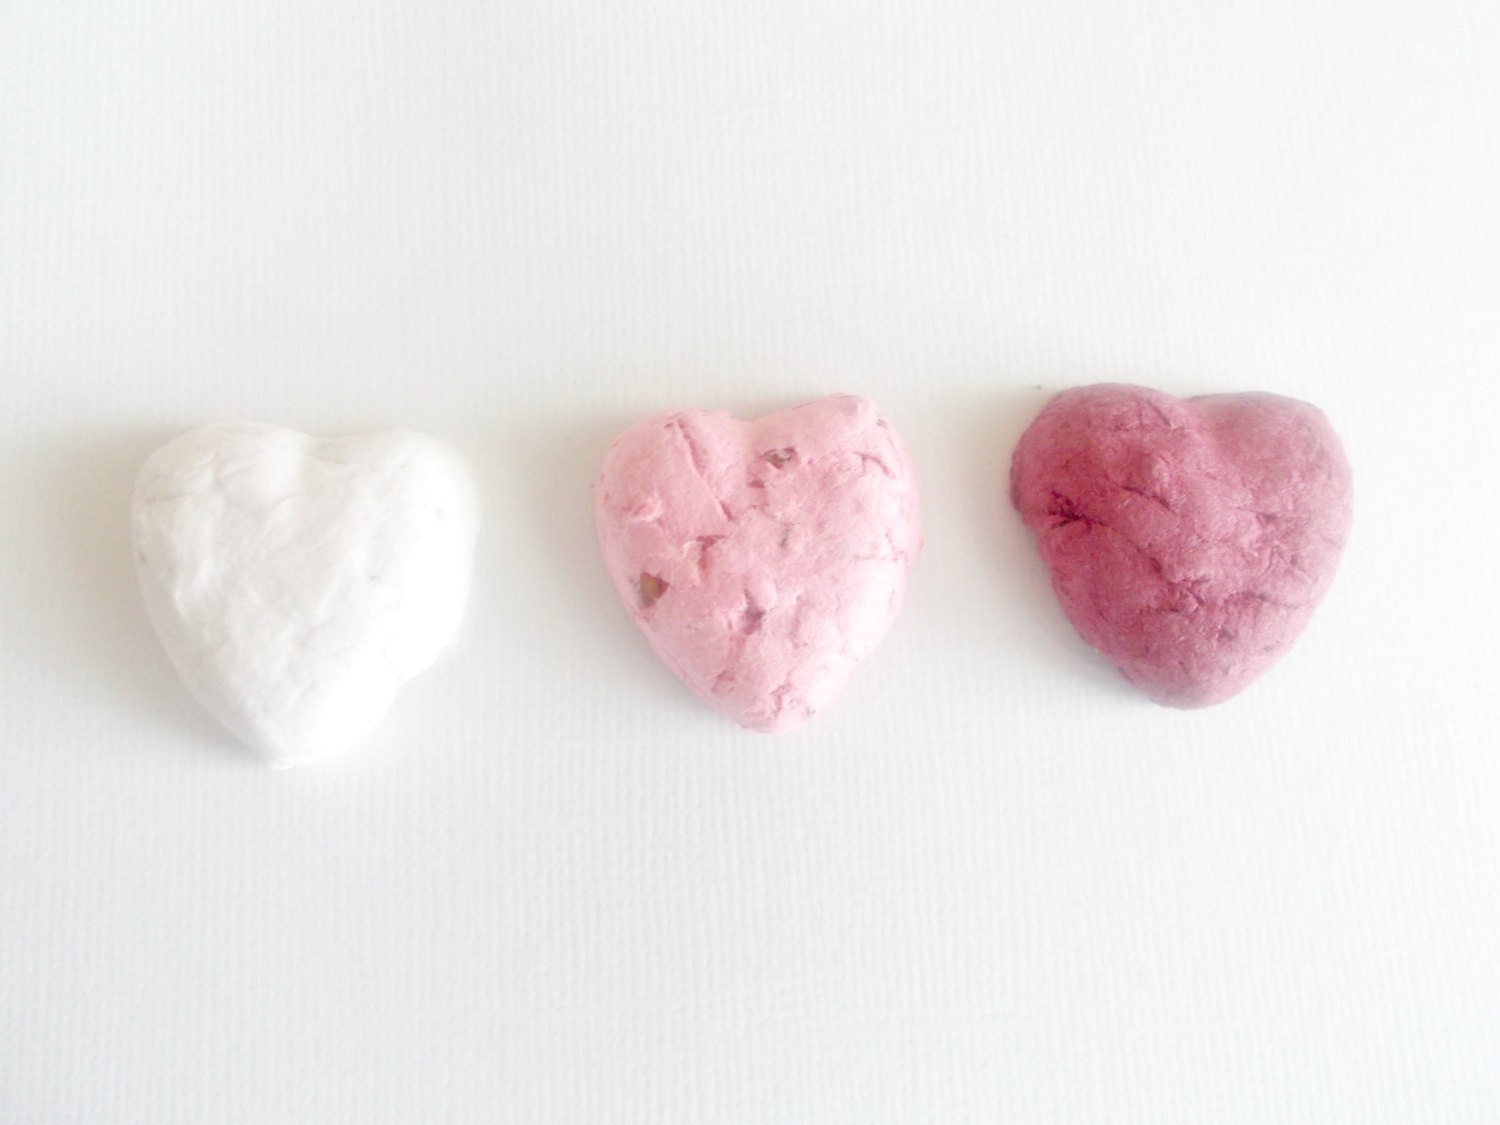 50 Pink Ombre Heart Shaped Seed Bombs - Plantable Paper Embedded With Flower Seeds - Toss and Grow!